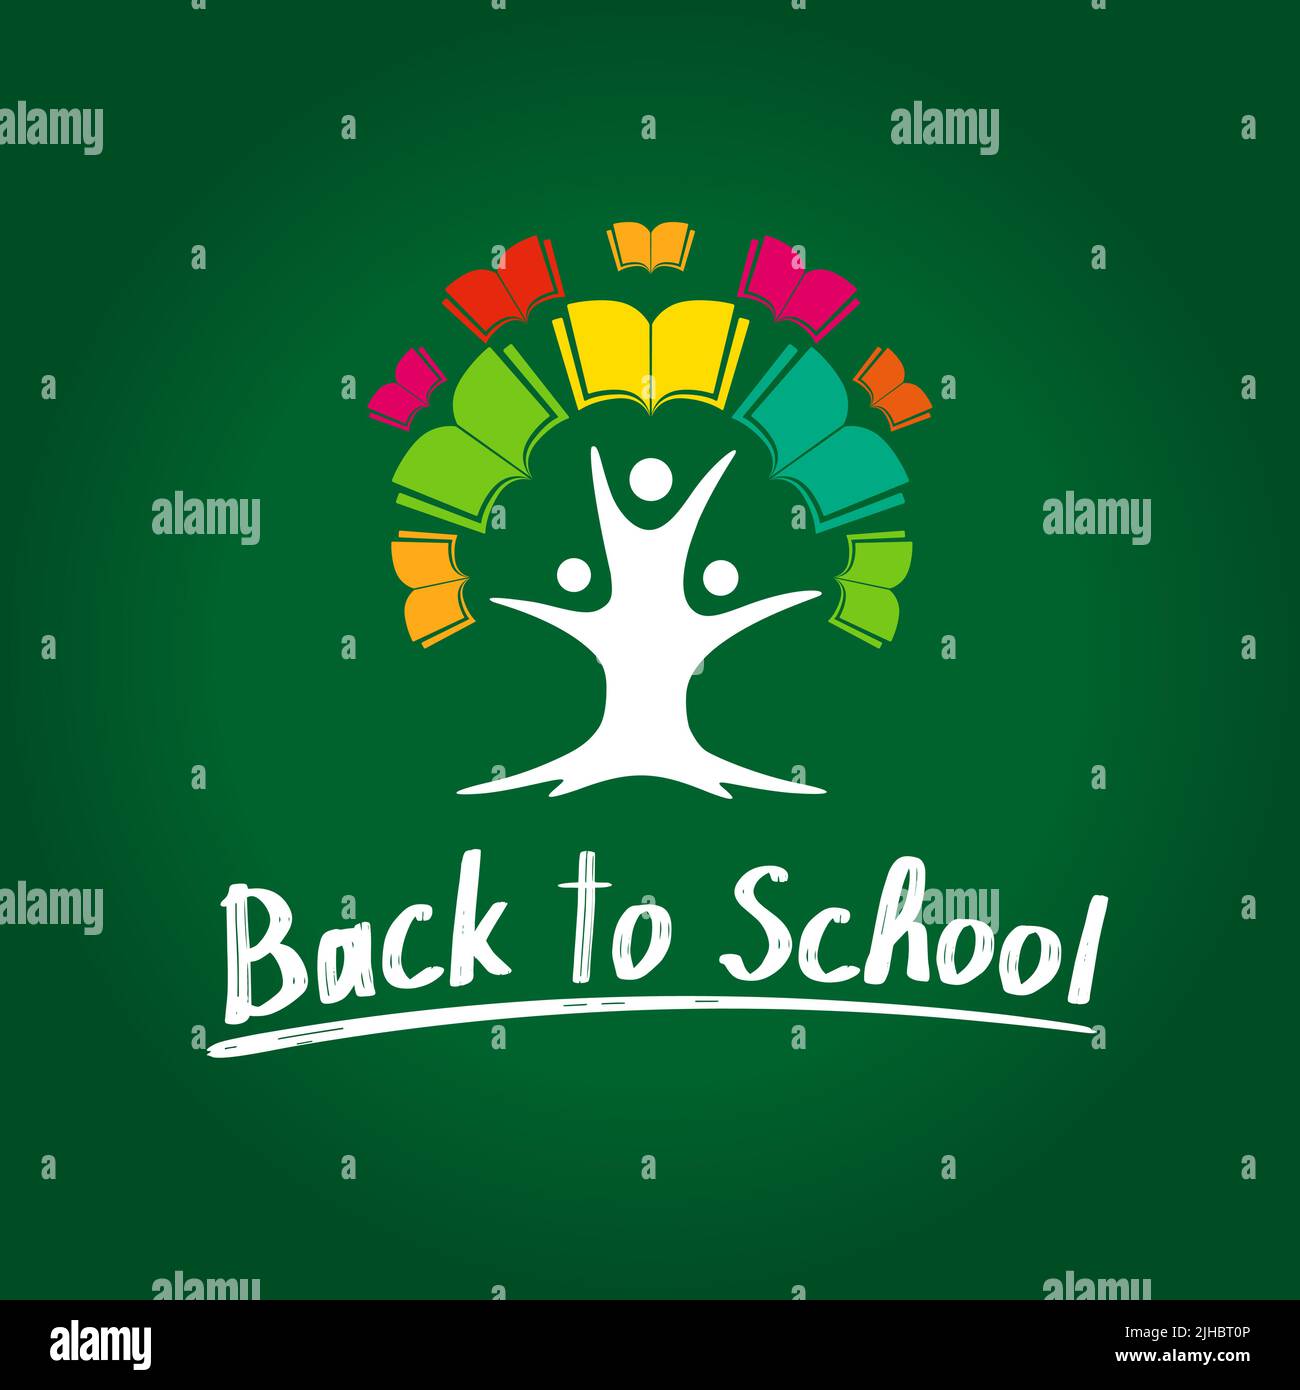 Back to school tree icon with colored books and handwriting style text on green blackboard. Educational logo concept. Isolated abstract graphic design Stock Vector